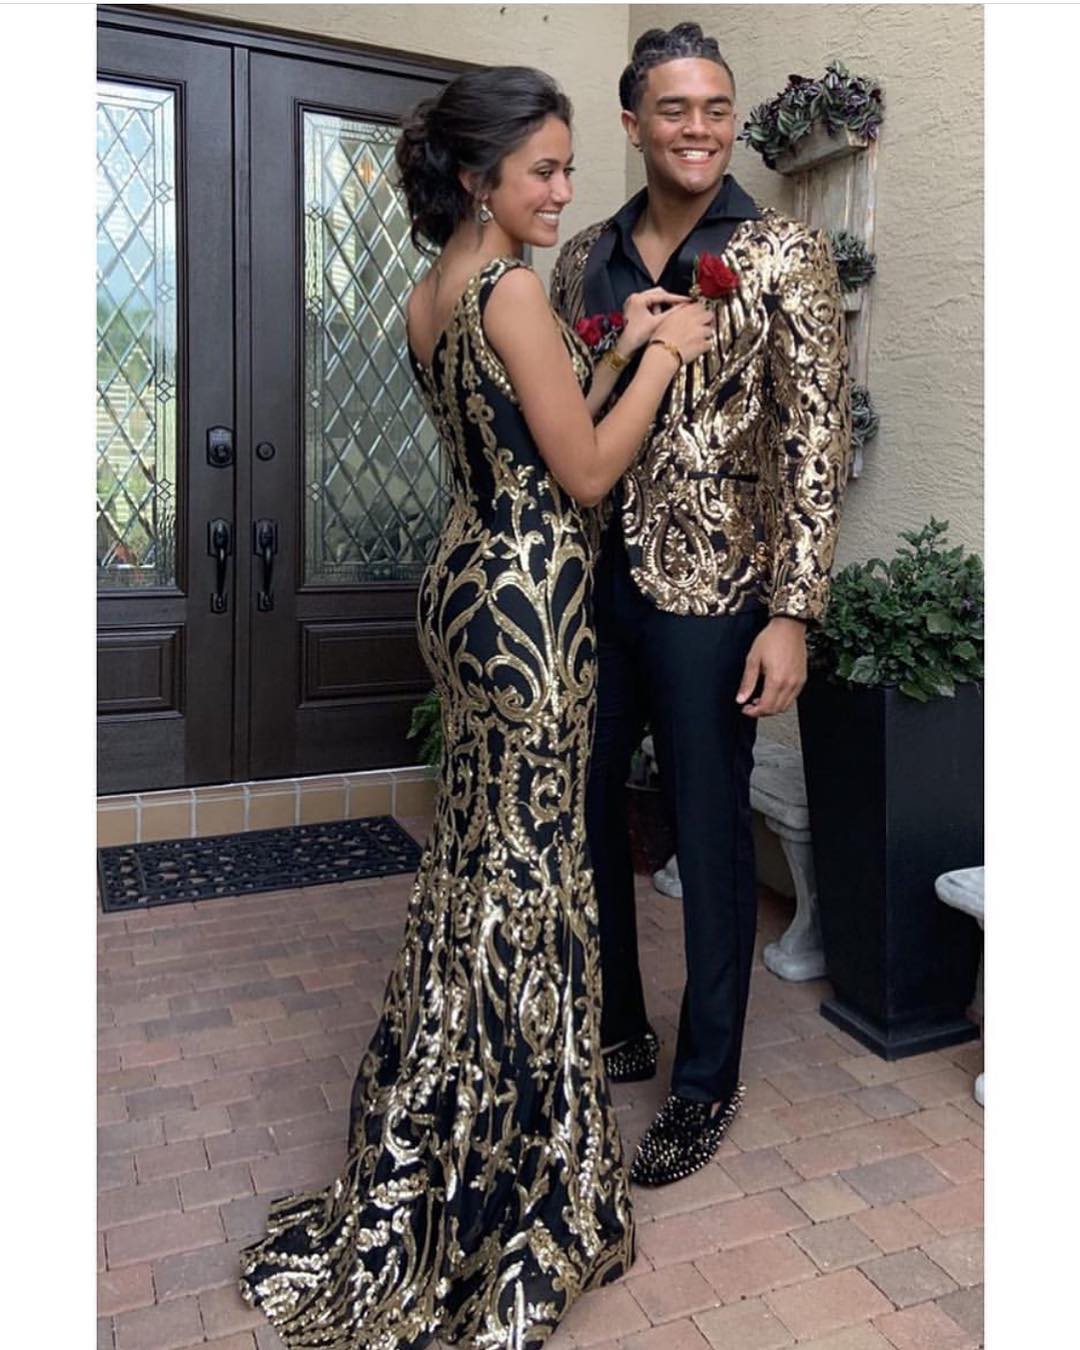 Prom couple outfit goals - sparkling ...